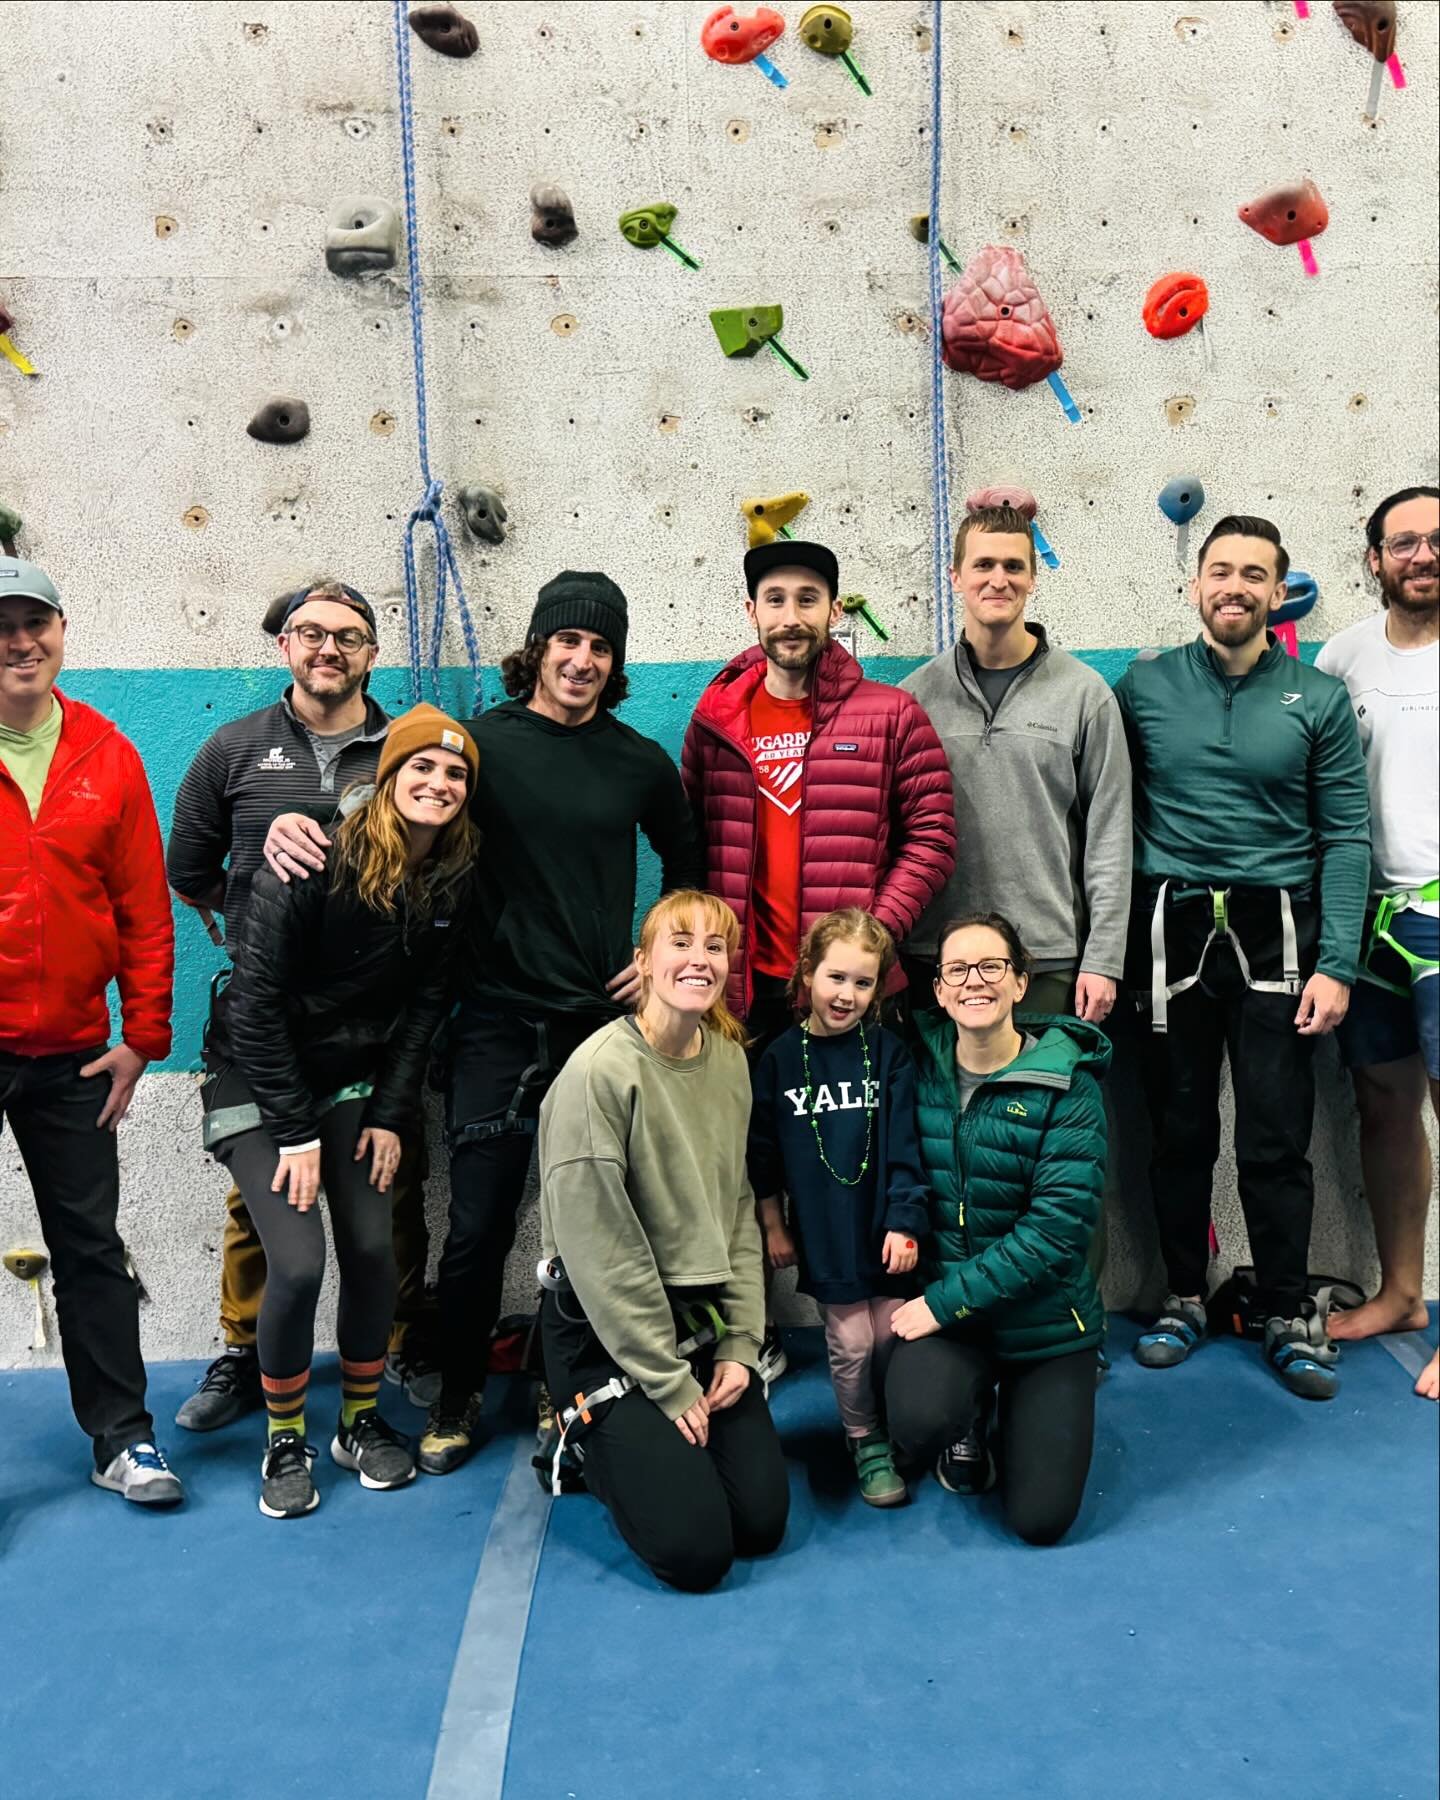 FREE #climbing for veterans @cityclimbgym tomorrow (3/9). This is becoming a super fun, regular community meetup. 

Swipe for info, RSVP at link in bio.

These events are accessible, which means climbers with physical and invisible disabilities are w